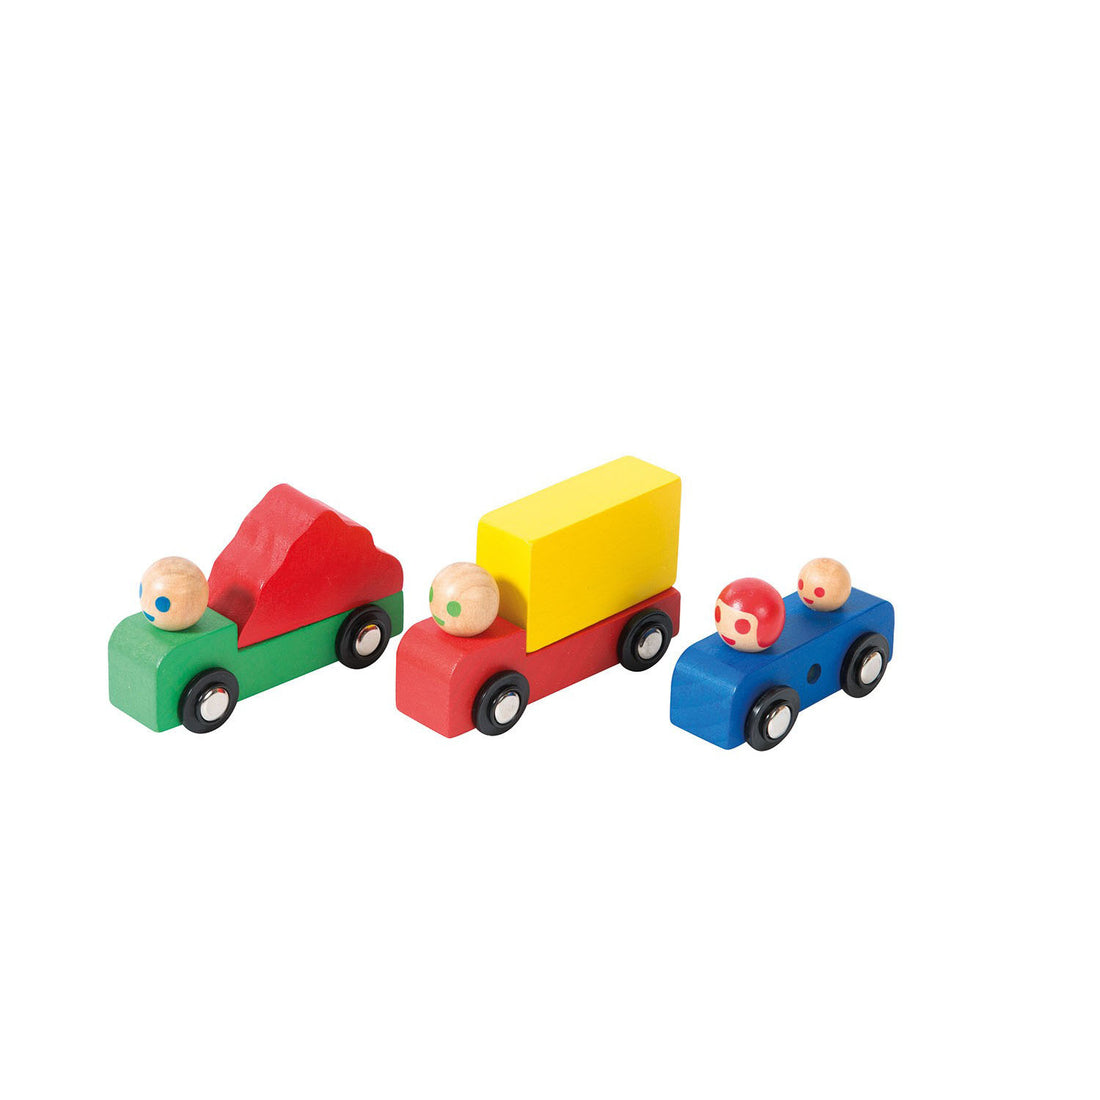 moulin-roty-wooden-cars-set-of-3- (1)